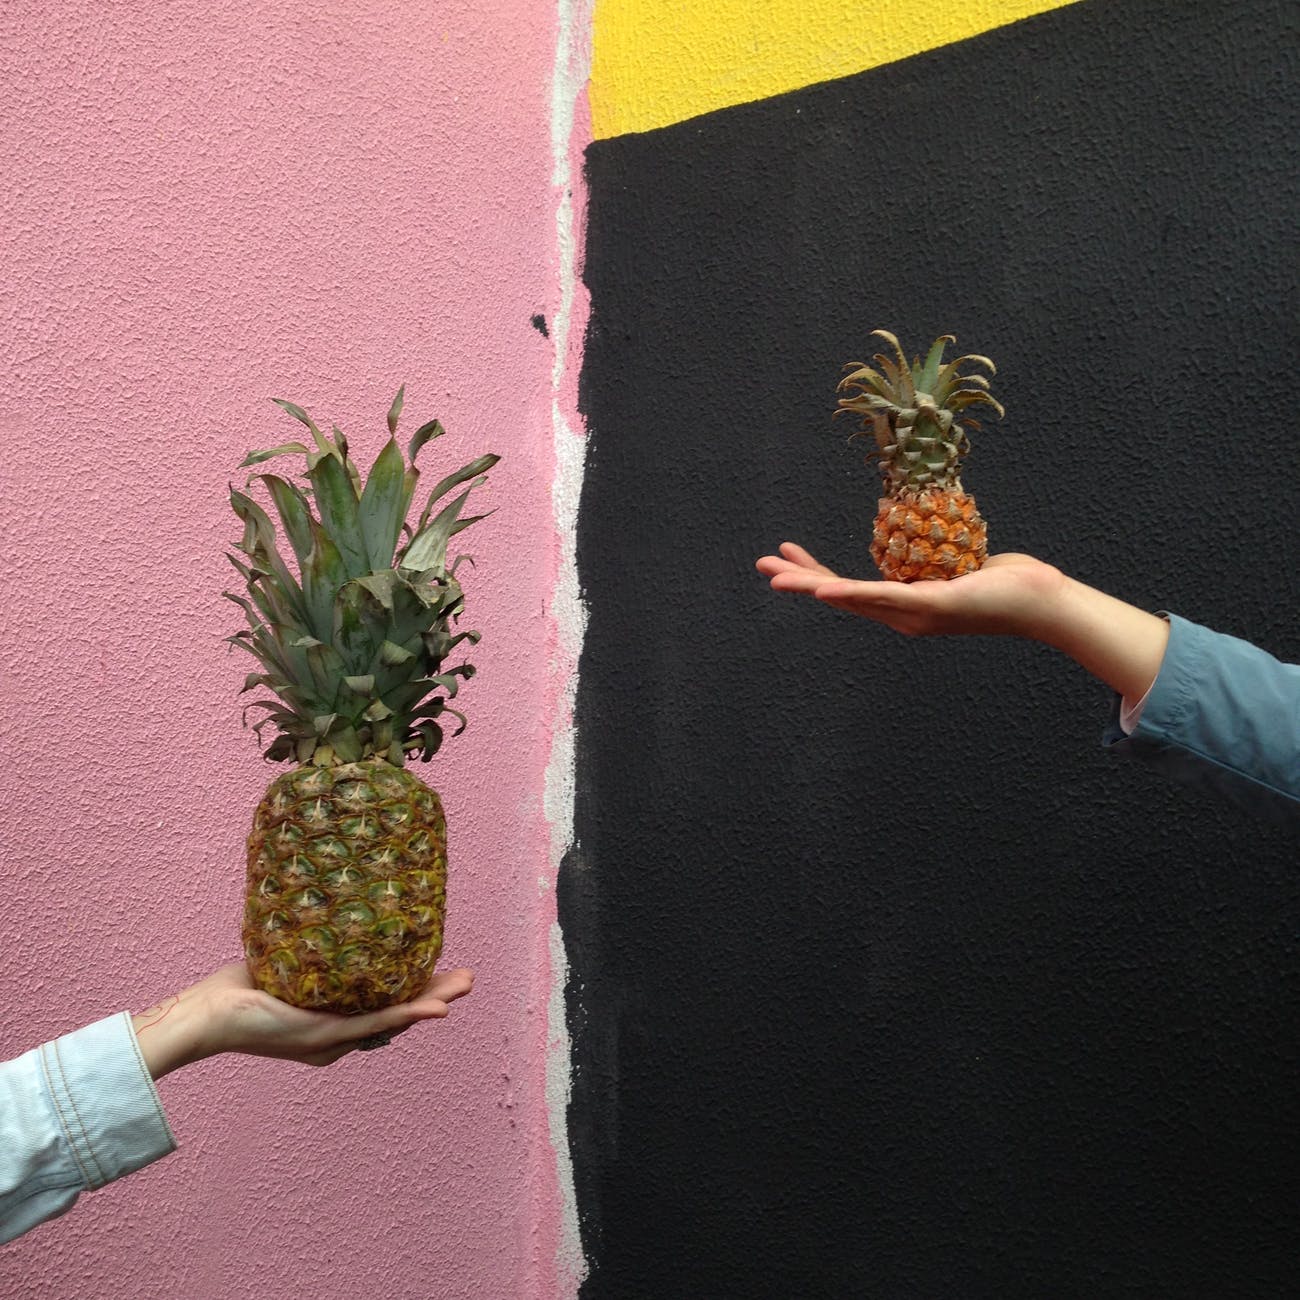 two people holding pineapple fruits against a multicolored wall